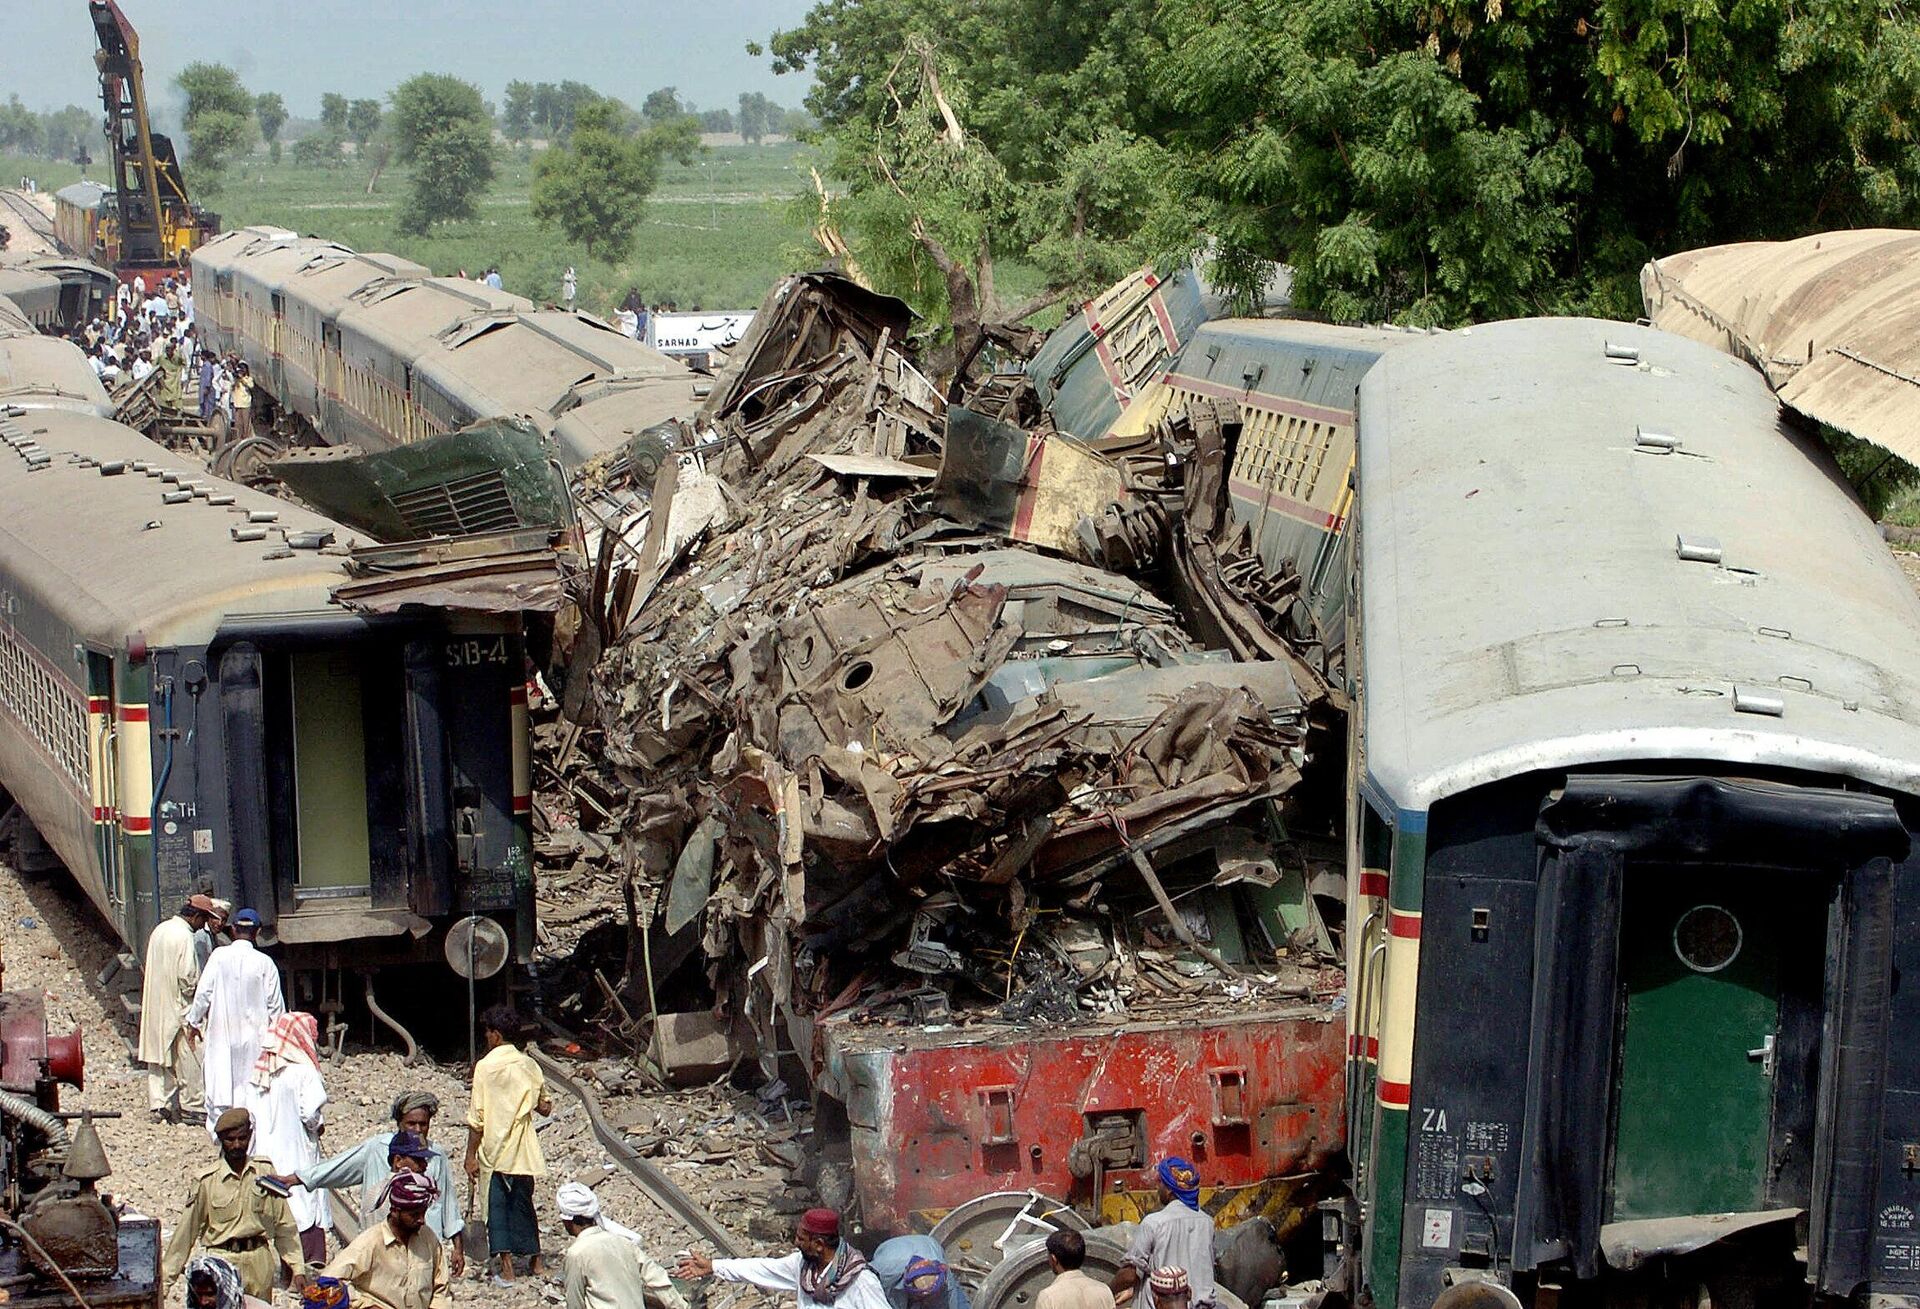 Pakistani villagers gather around the wreckage of three trains following a crash in Ghotki, 13 July 2005. Three crowded passenger trains collided in a devastating crash at a station in southern Pakistan, killing up to 150 people, injuring 1,000 and leaving many others trapped, officials said. Rescuers were trying to extract hundreds of people still trapped in the mangled carriages of the three trains, which lay scattered amid piles of debris and body parts, and police warned the death toll would likely rise.  - Sputnik International, 1920, 07.10.2022